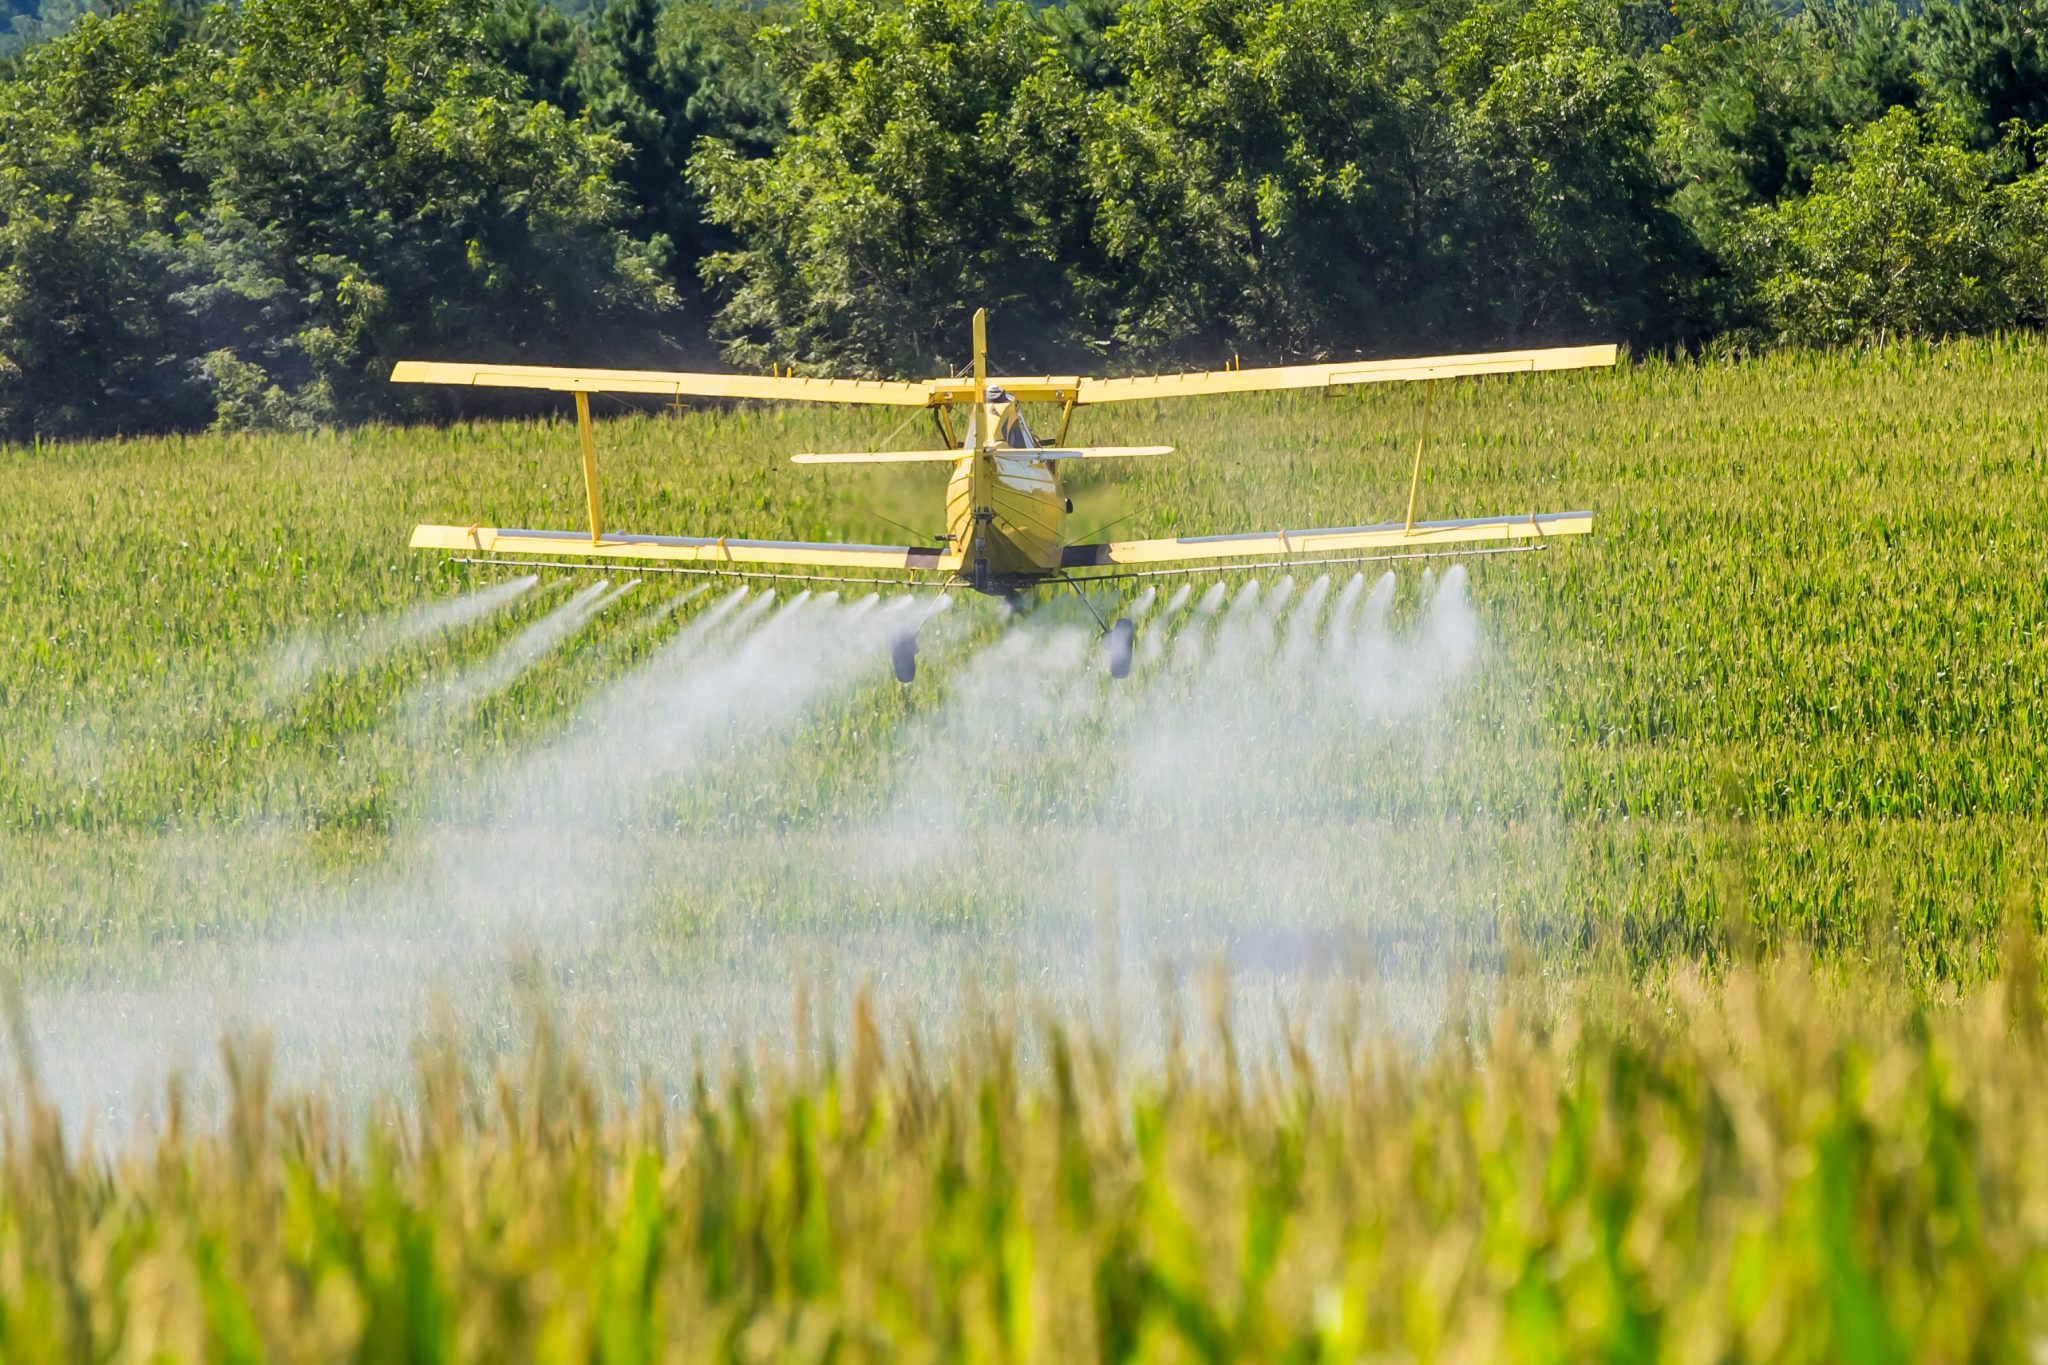 A crop duster flying over a field